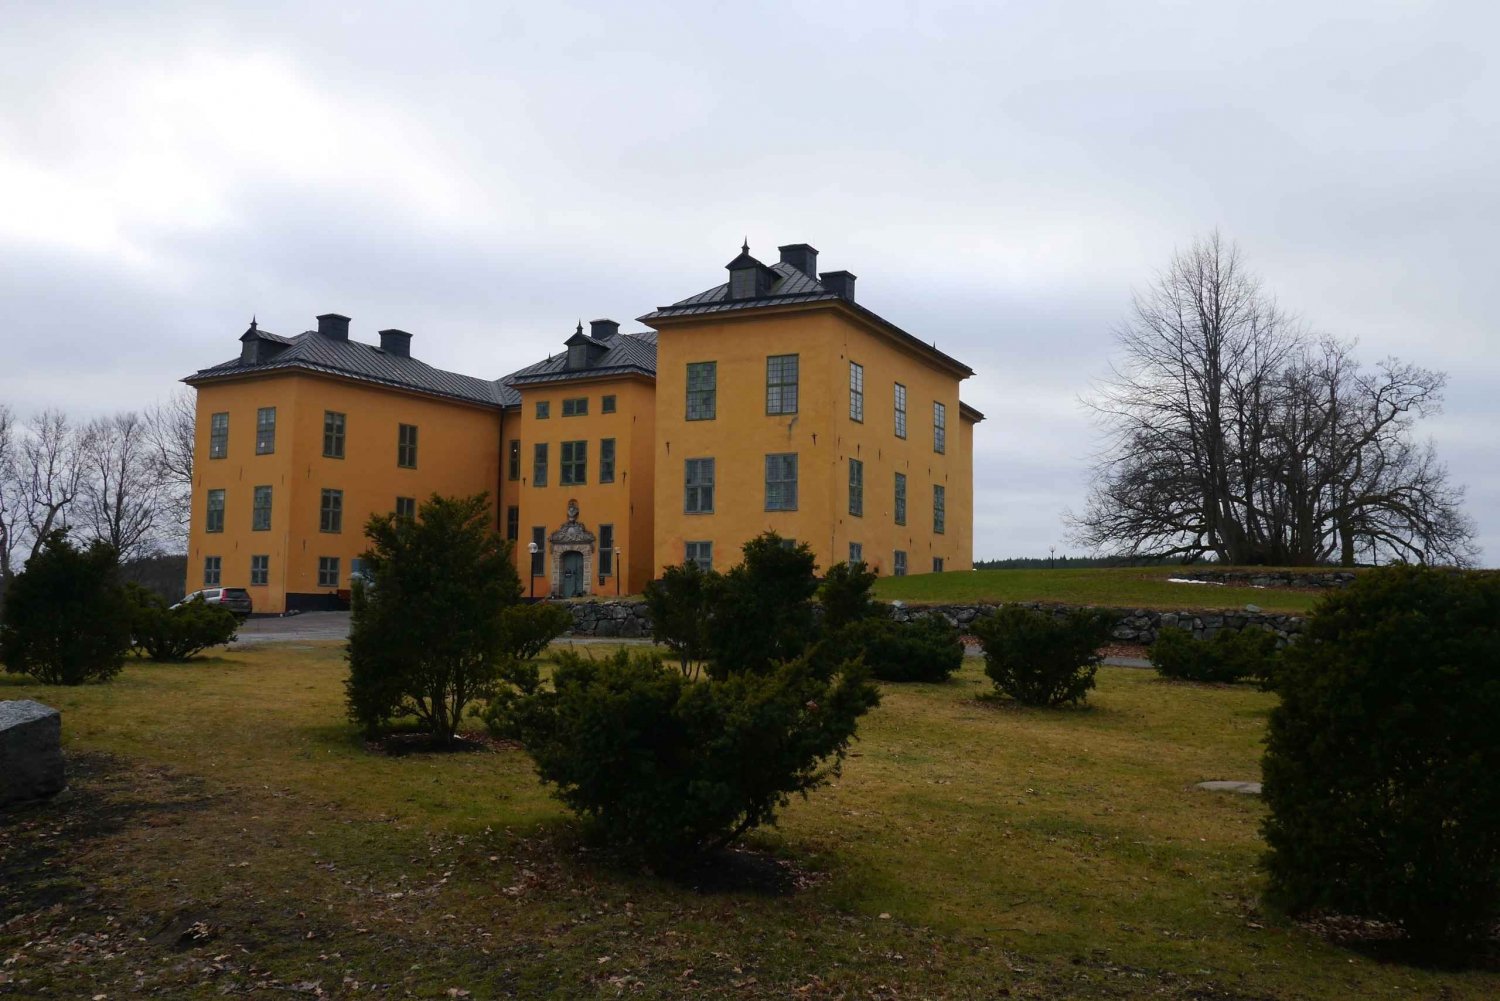 1-day 7h Royal Palace and Castle Tour from Stockholm